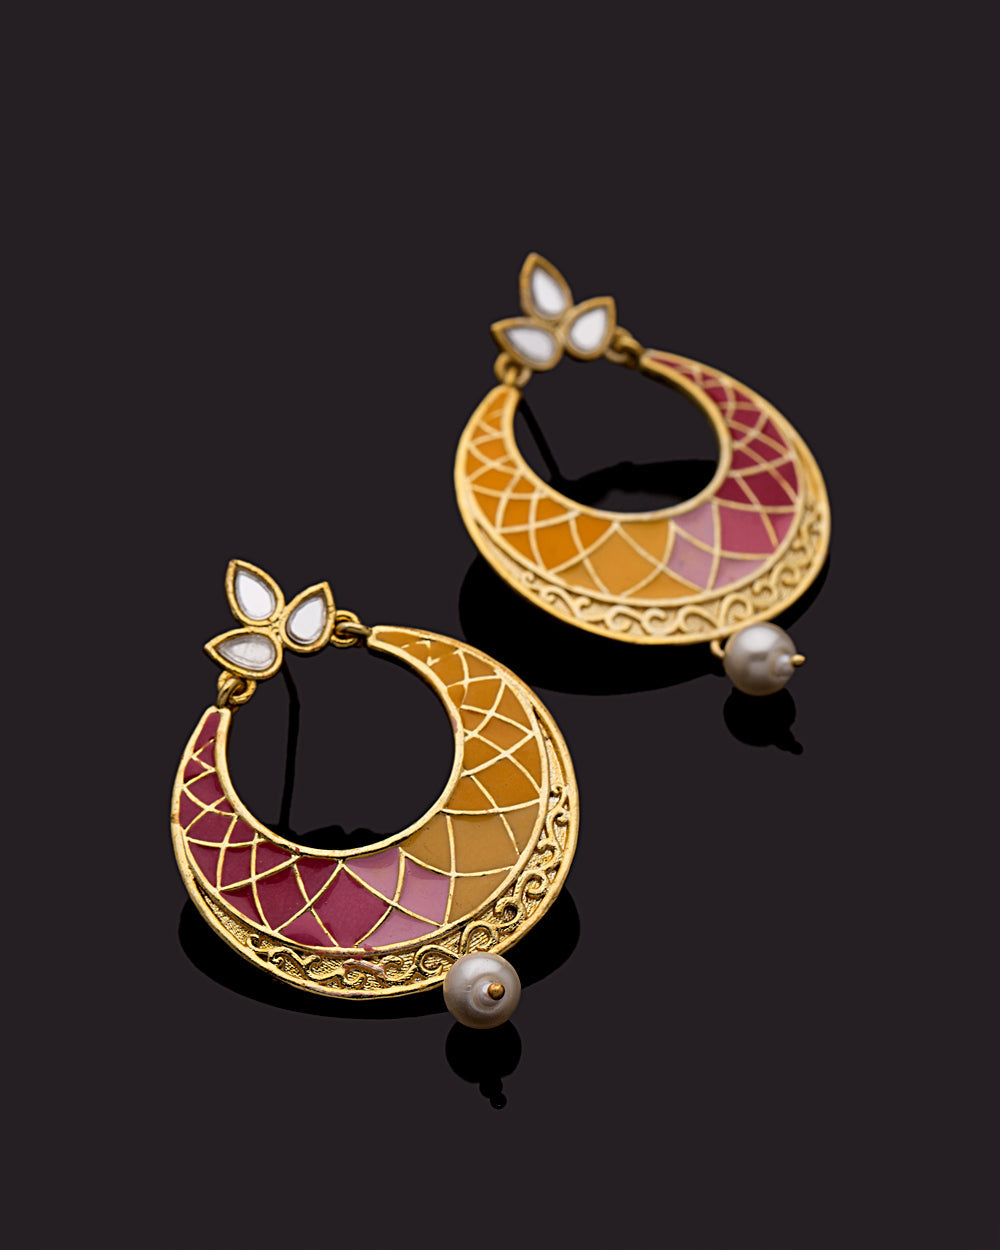 Women's Starry Ombre Yellow Gold Earrings For - Voylla